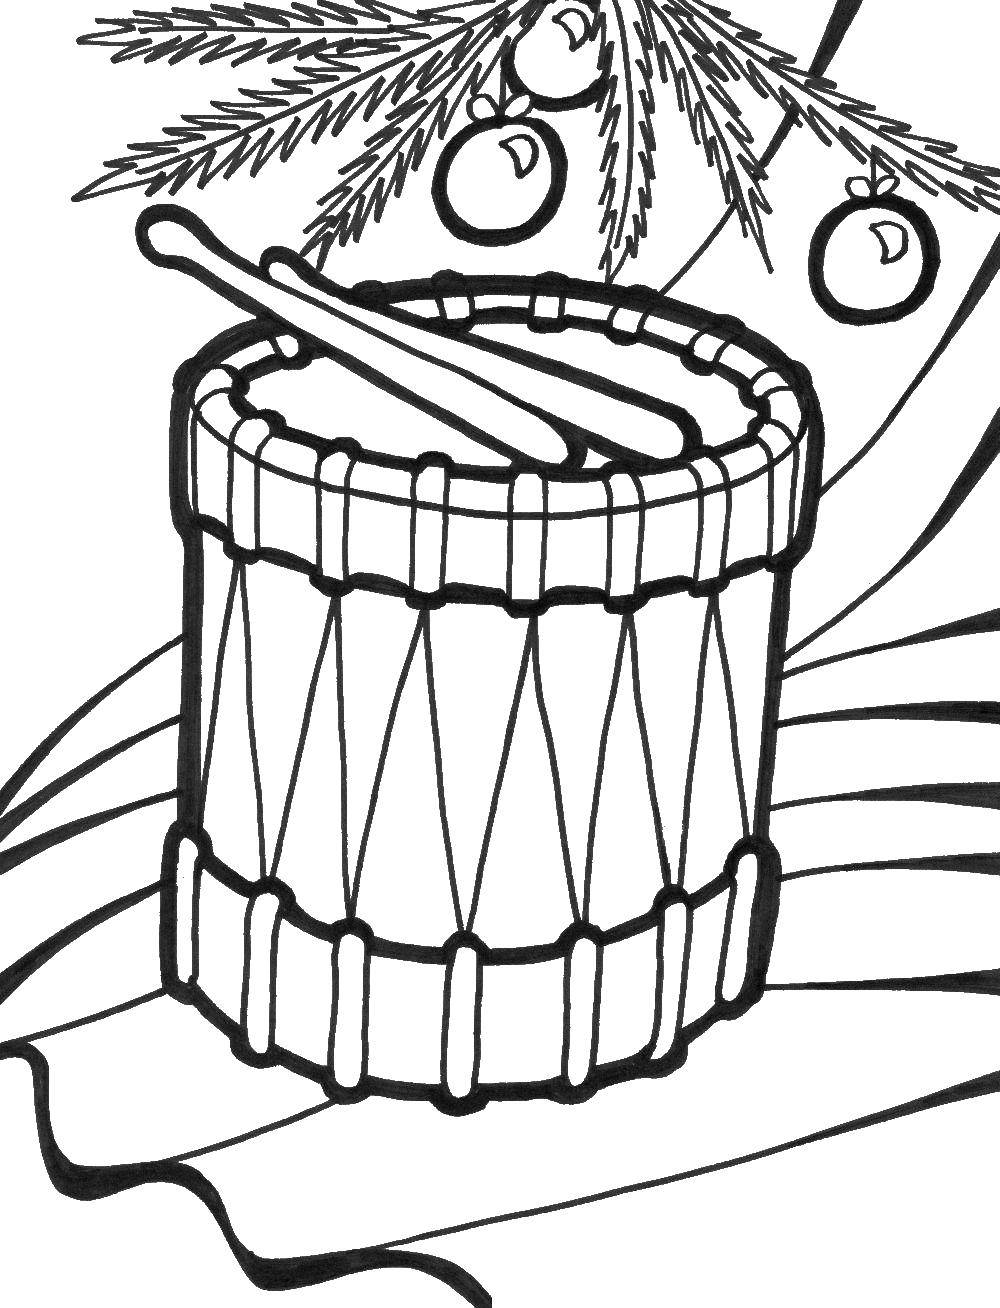 Coloring Drum. Category Drum . Tags:  Drum .